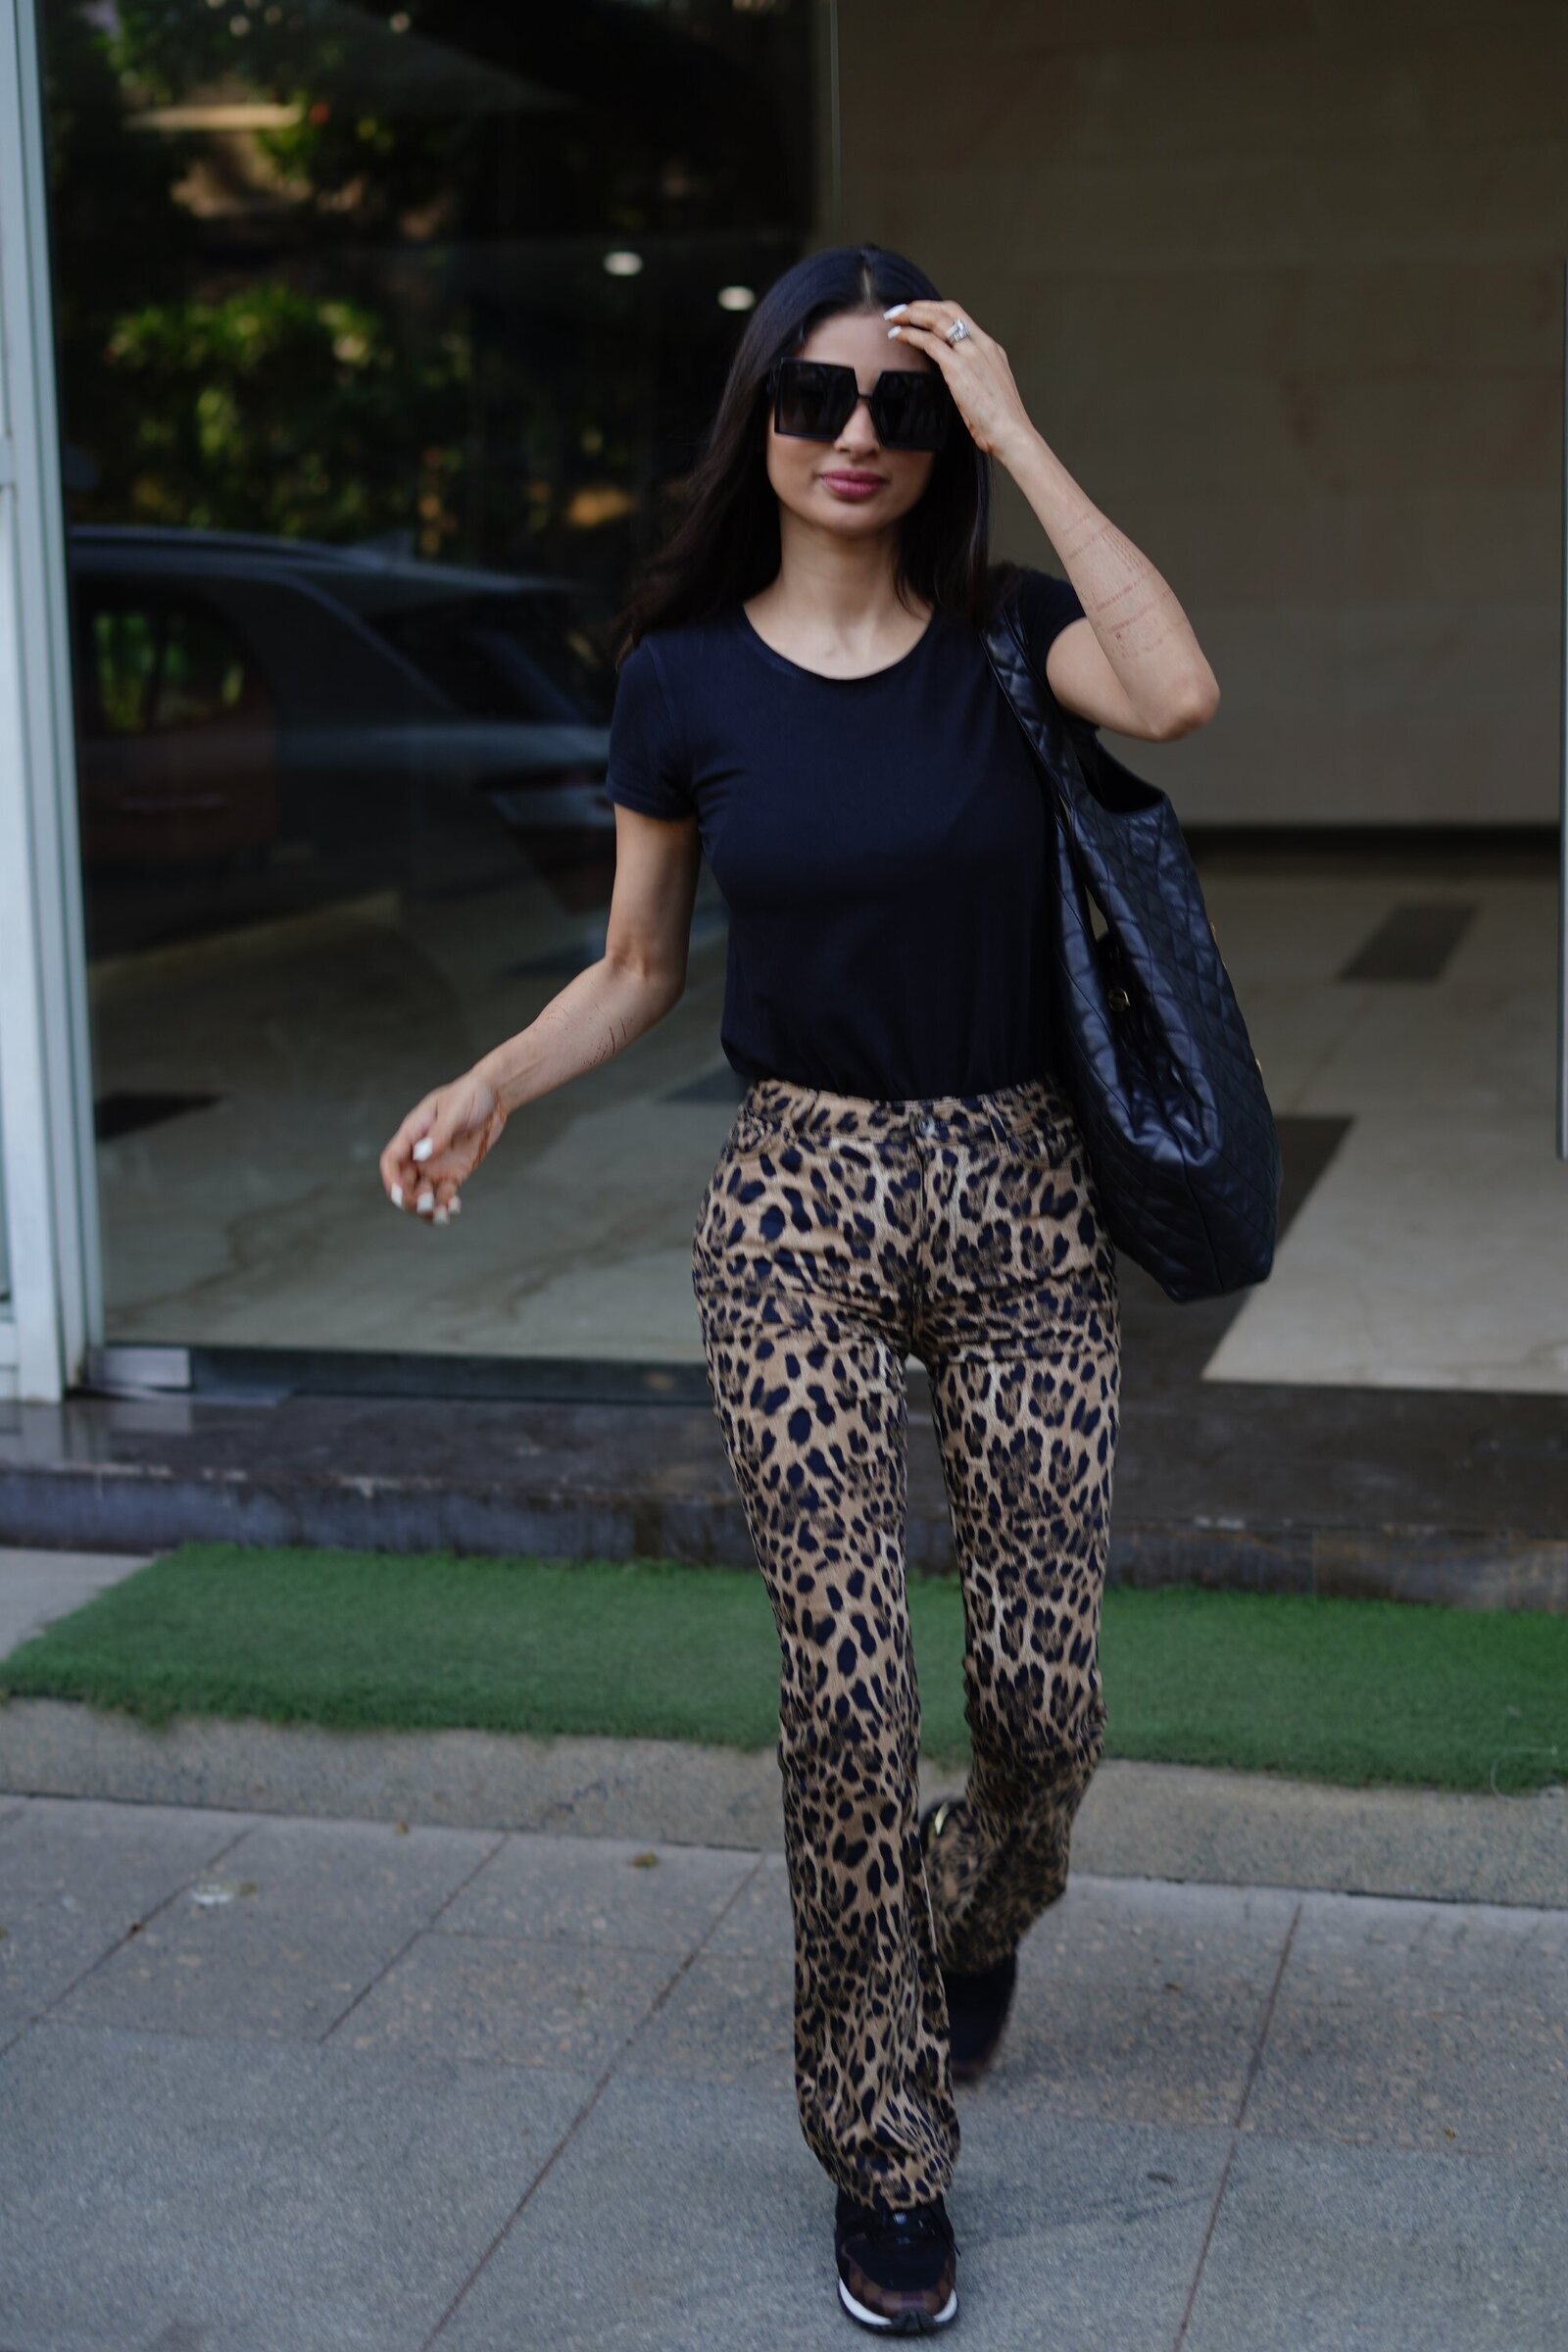 Mouni Roy - Photos: Celebs Spotted At Andheri | Picture 1901339